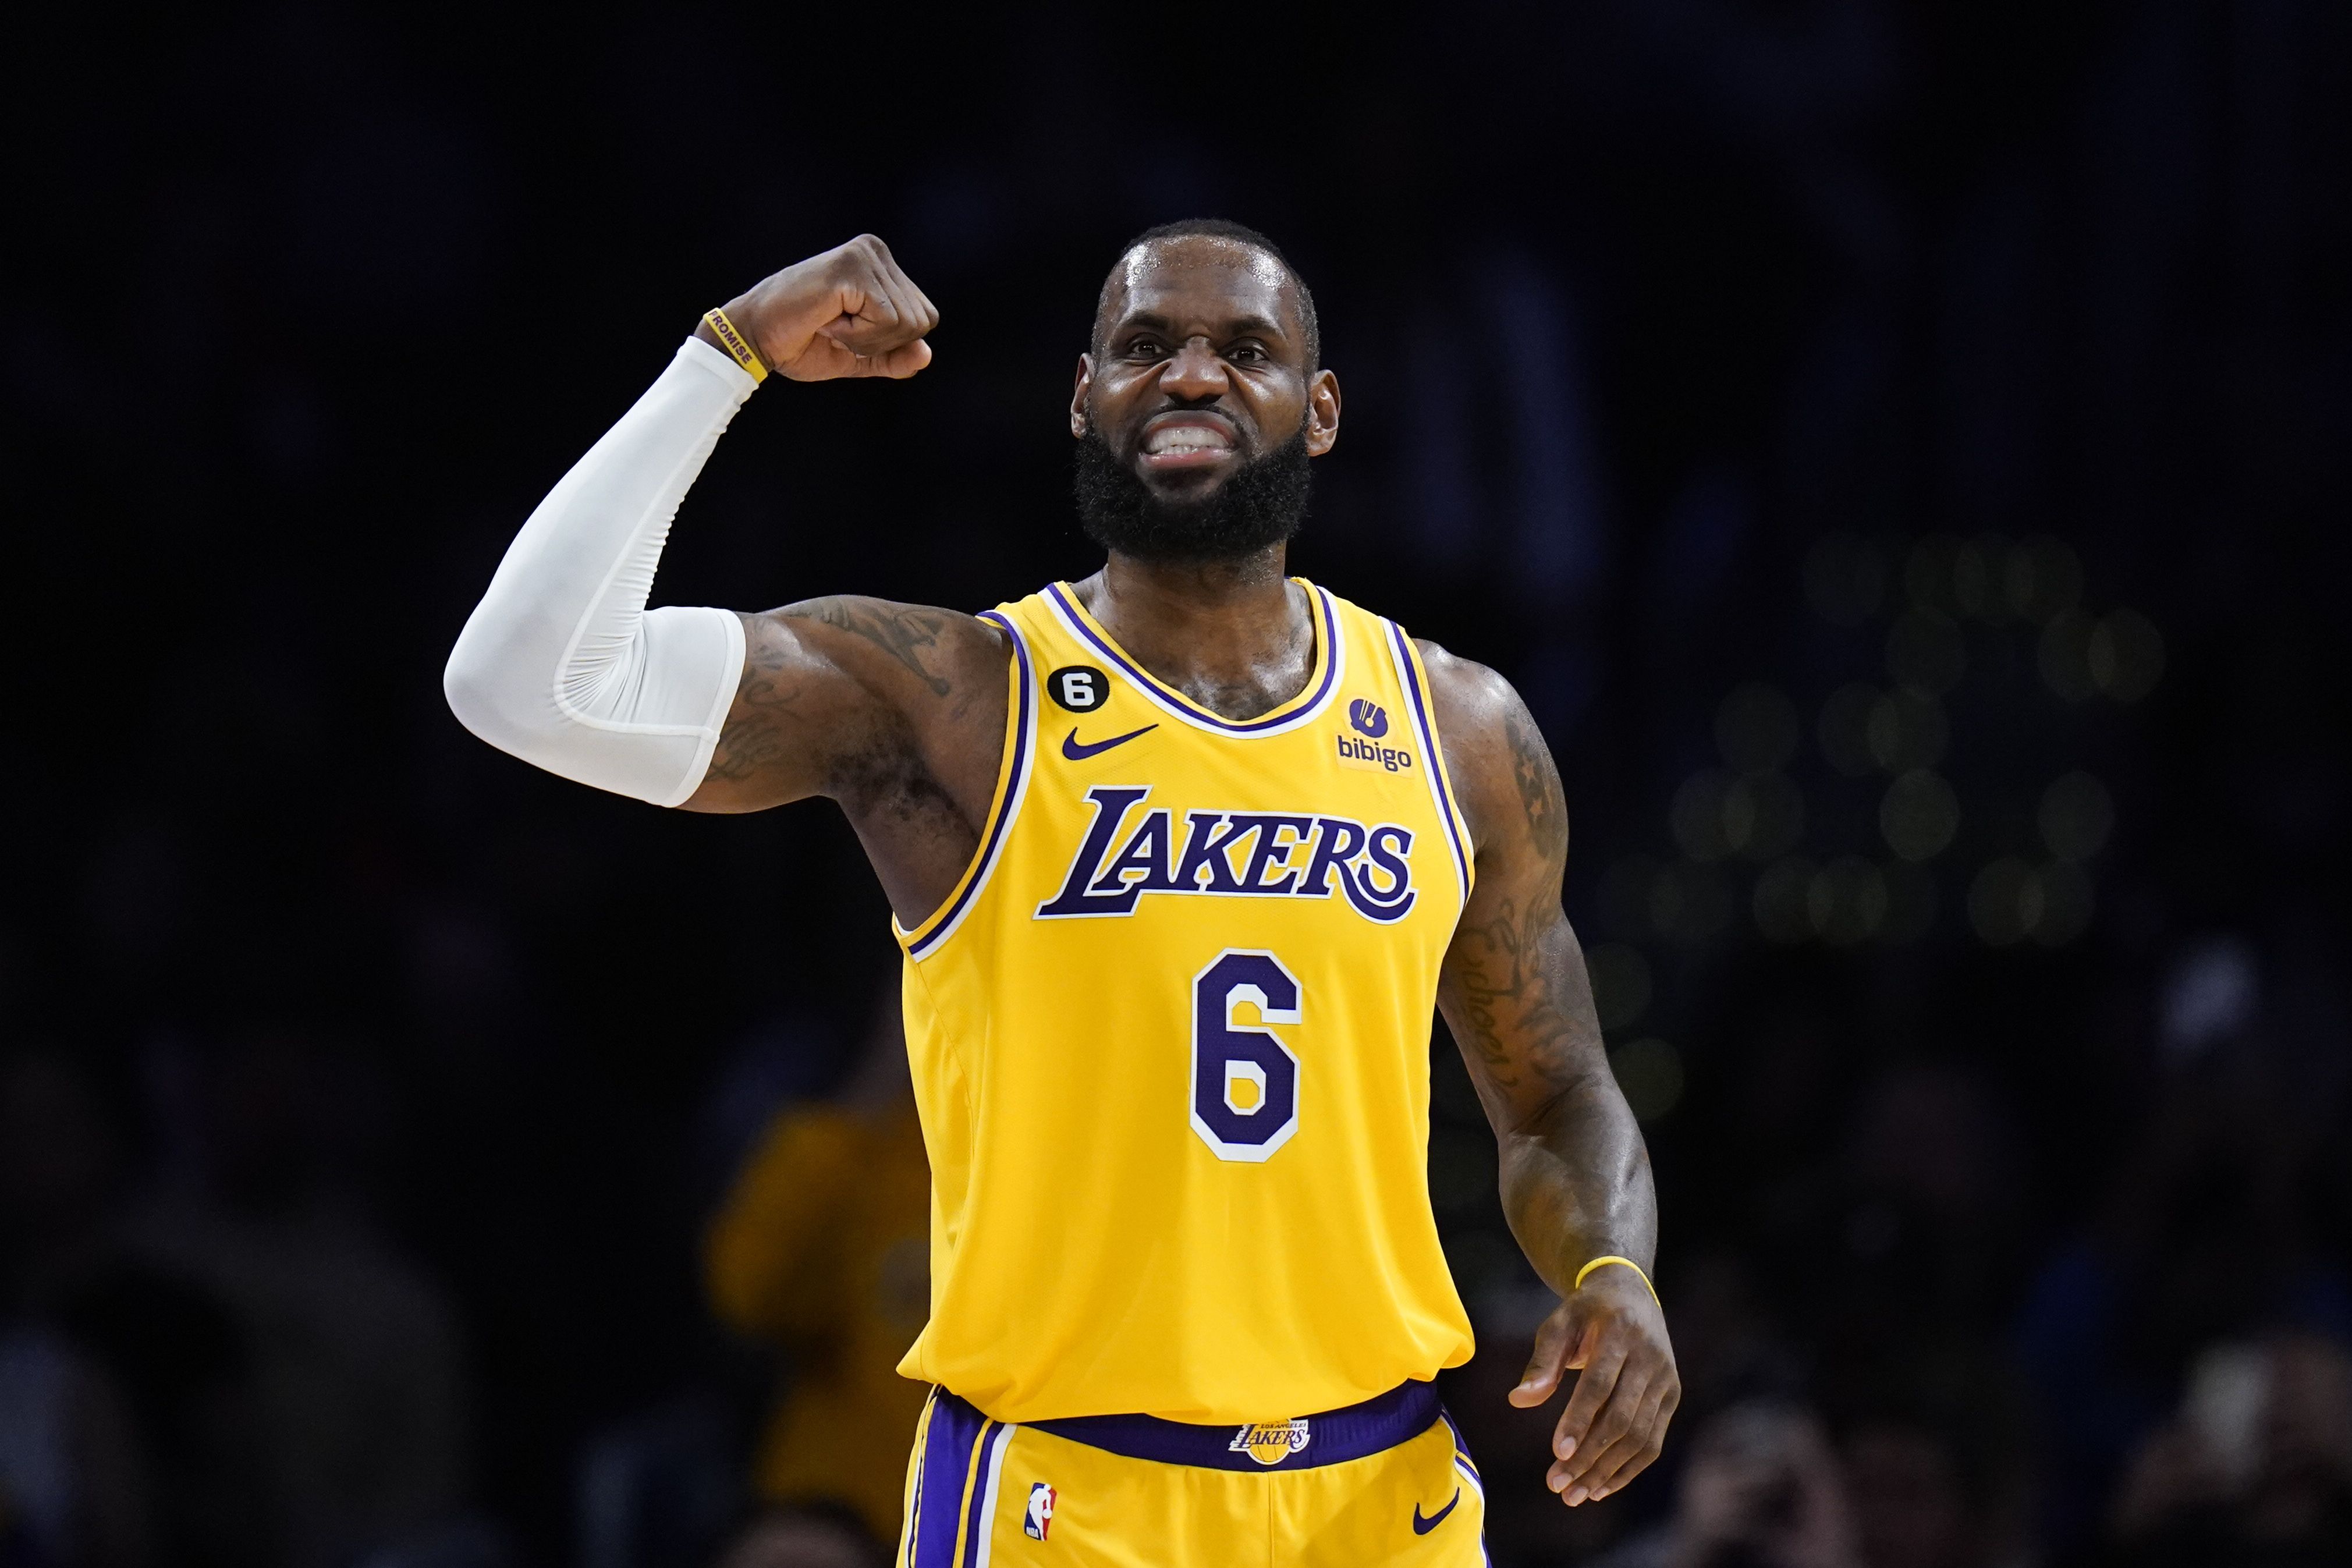 LeBron James passes Wilt Chamberlain for third all-time in field